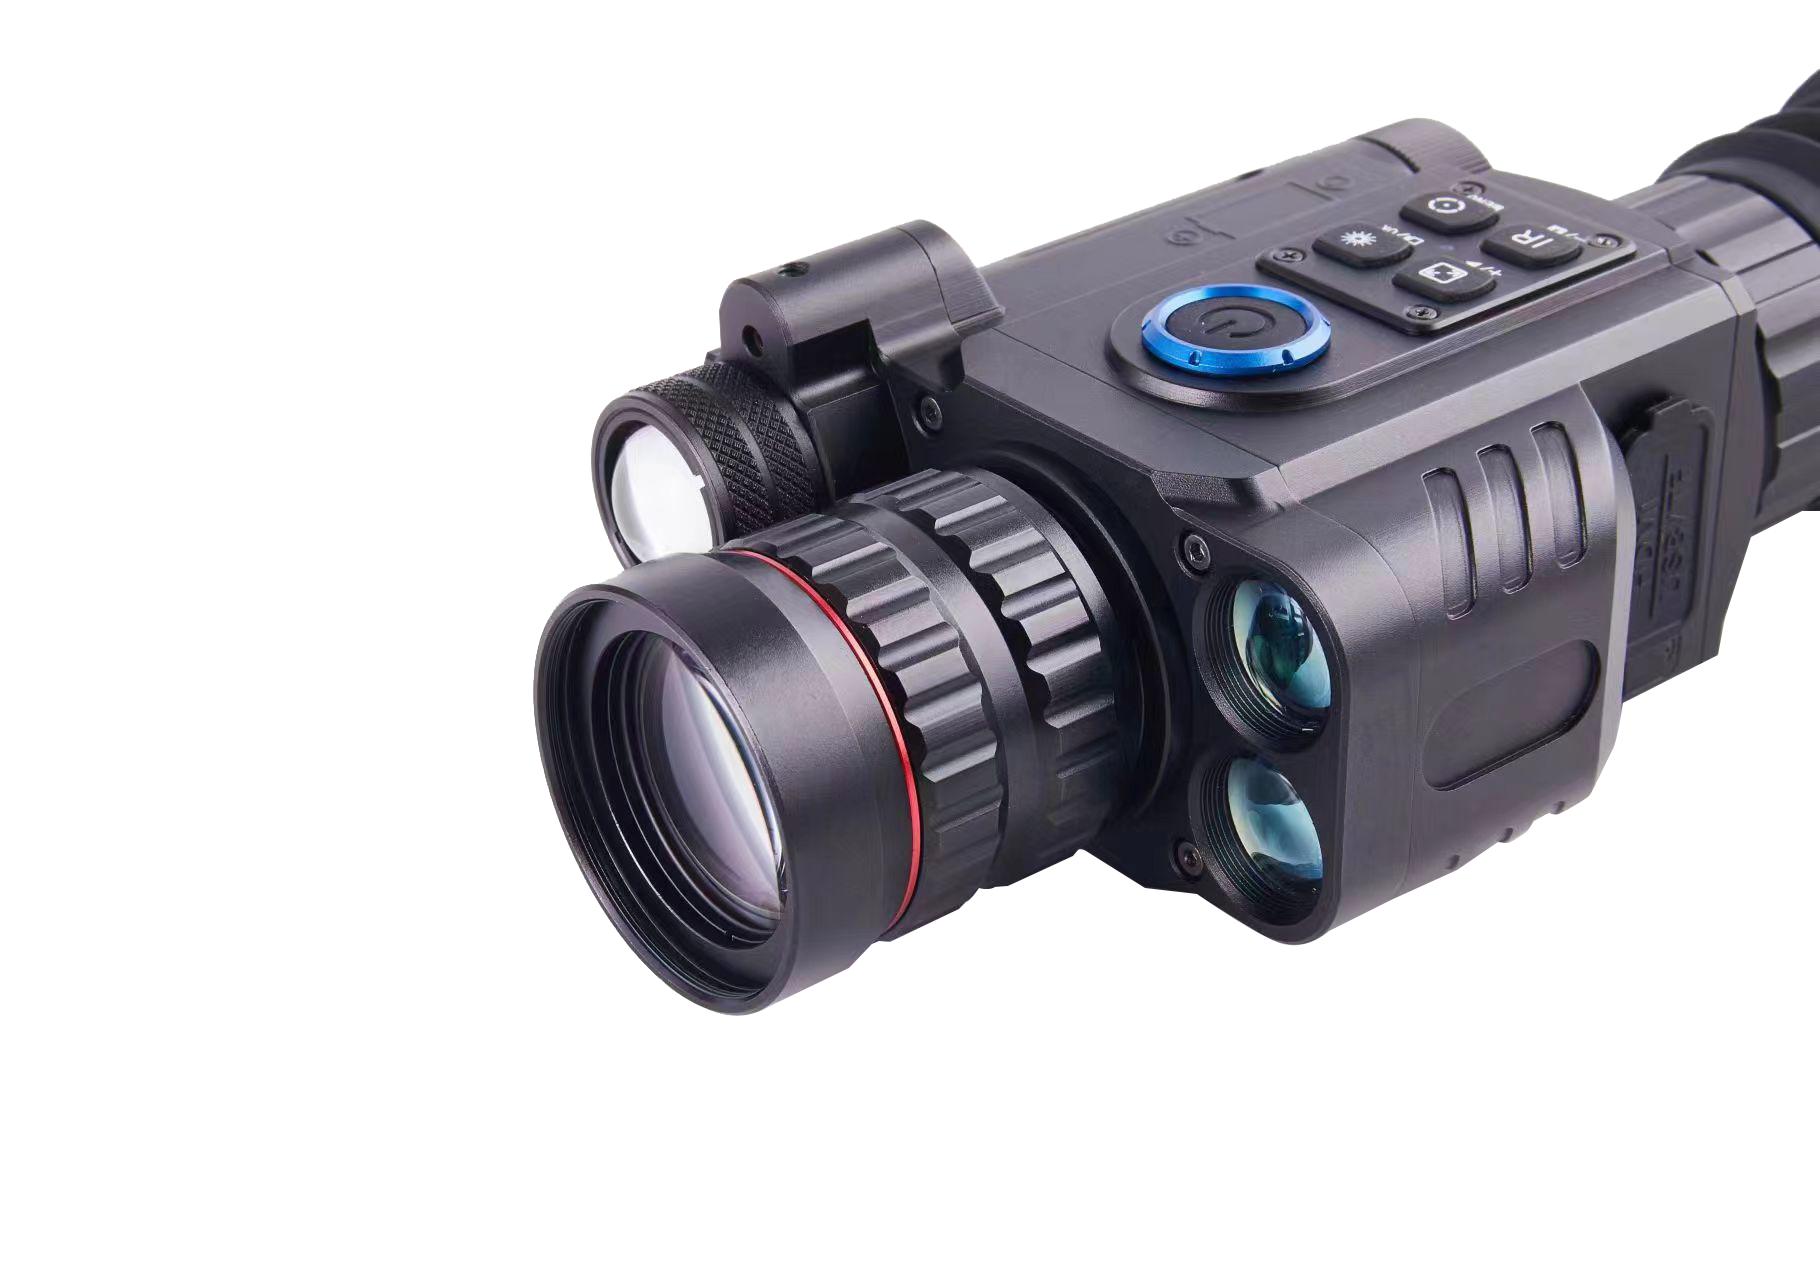 XD-S Night vision monocular with lRF